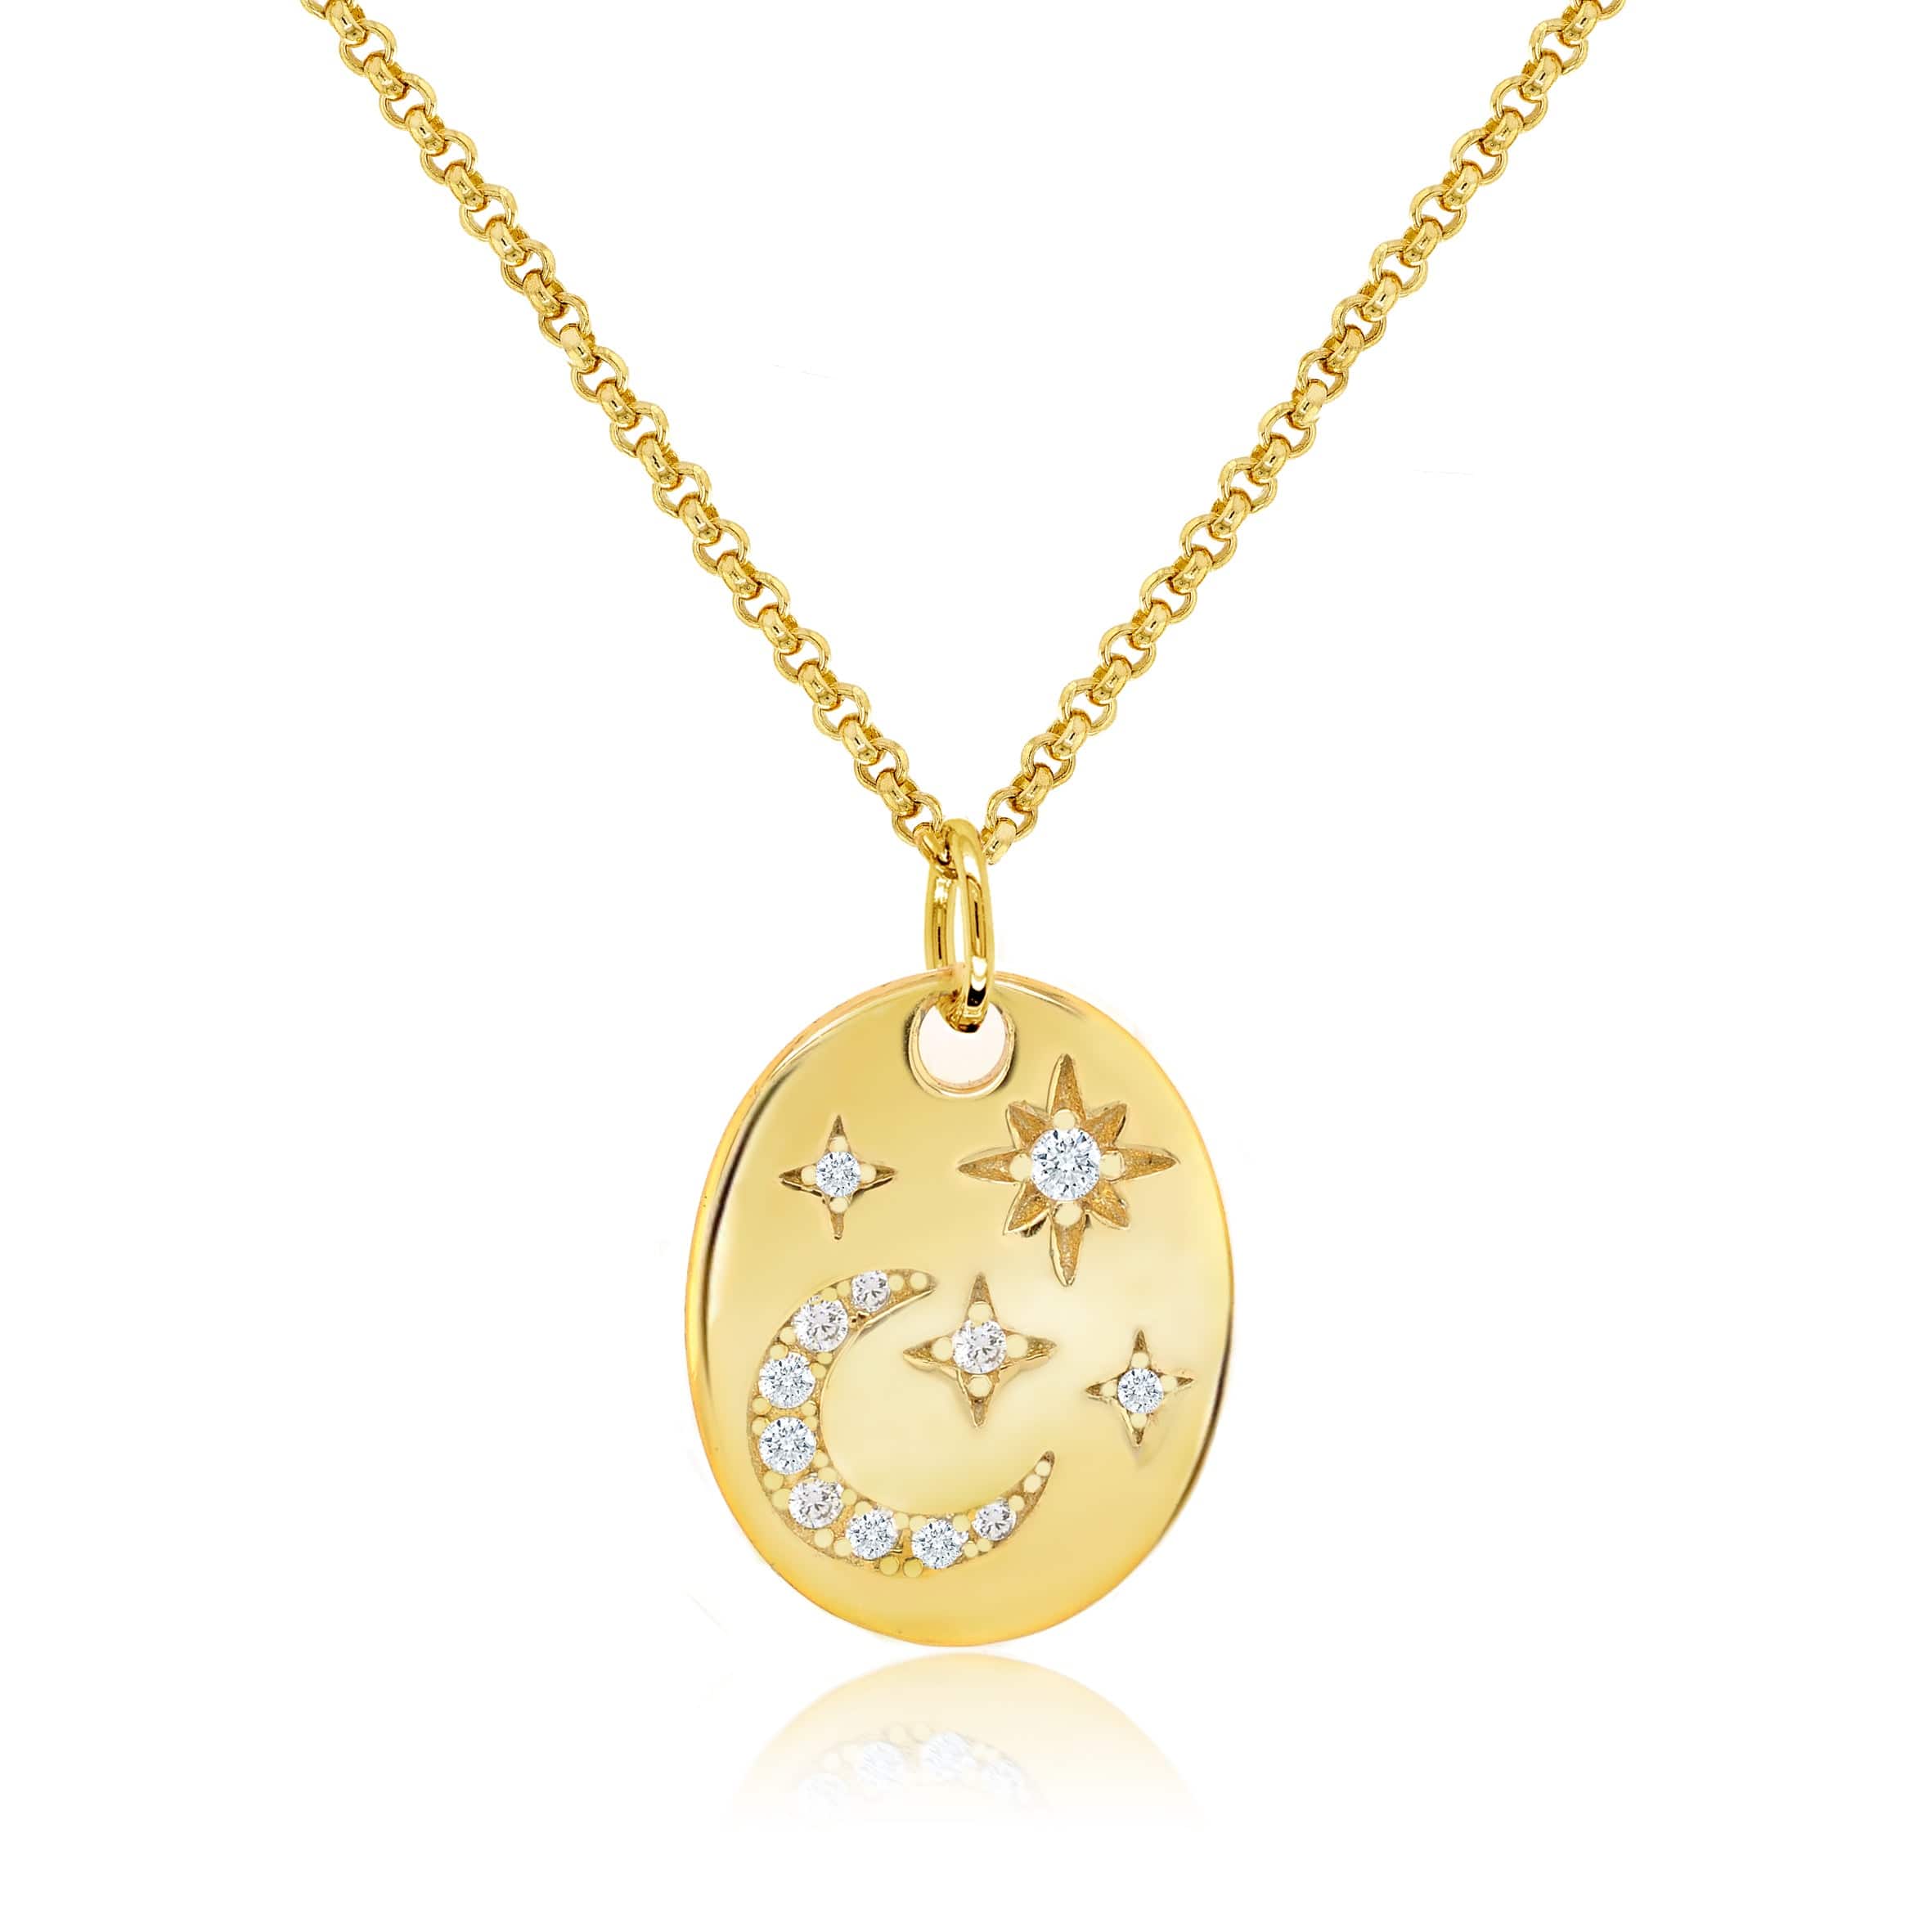 Lynora Silver Pendant Gold Plated / Clear Gold Zodiac Charm Pendant